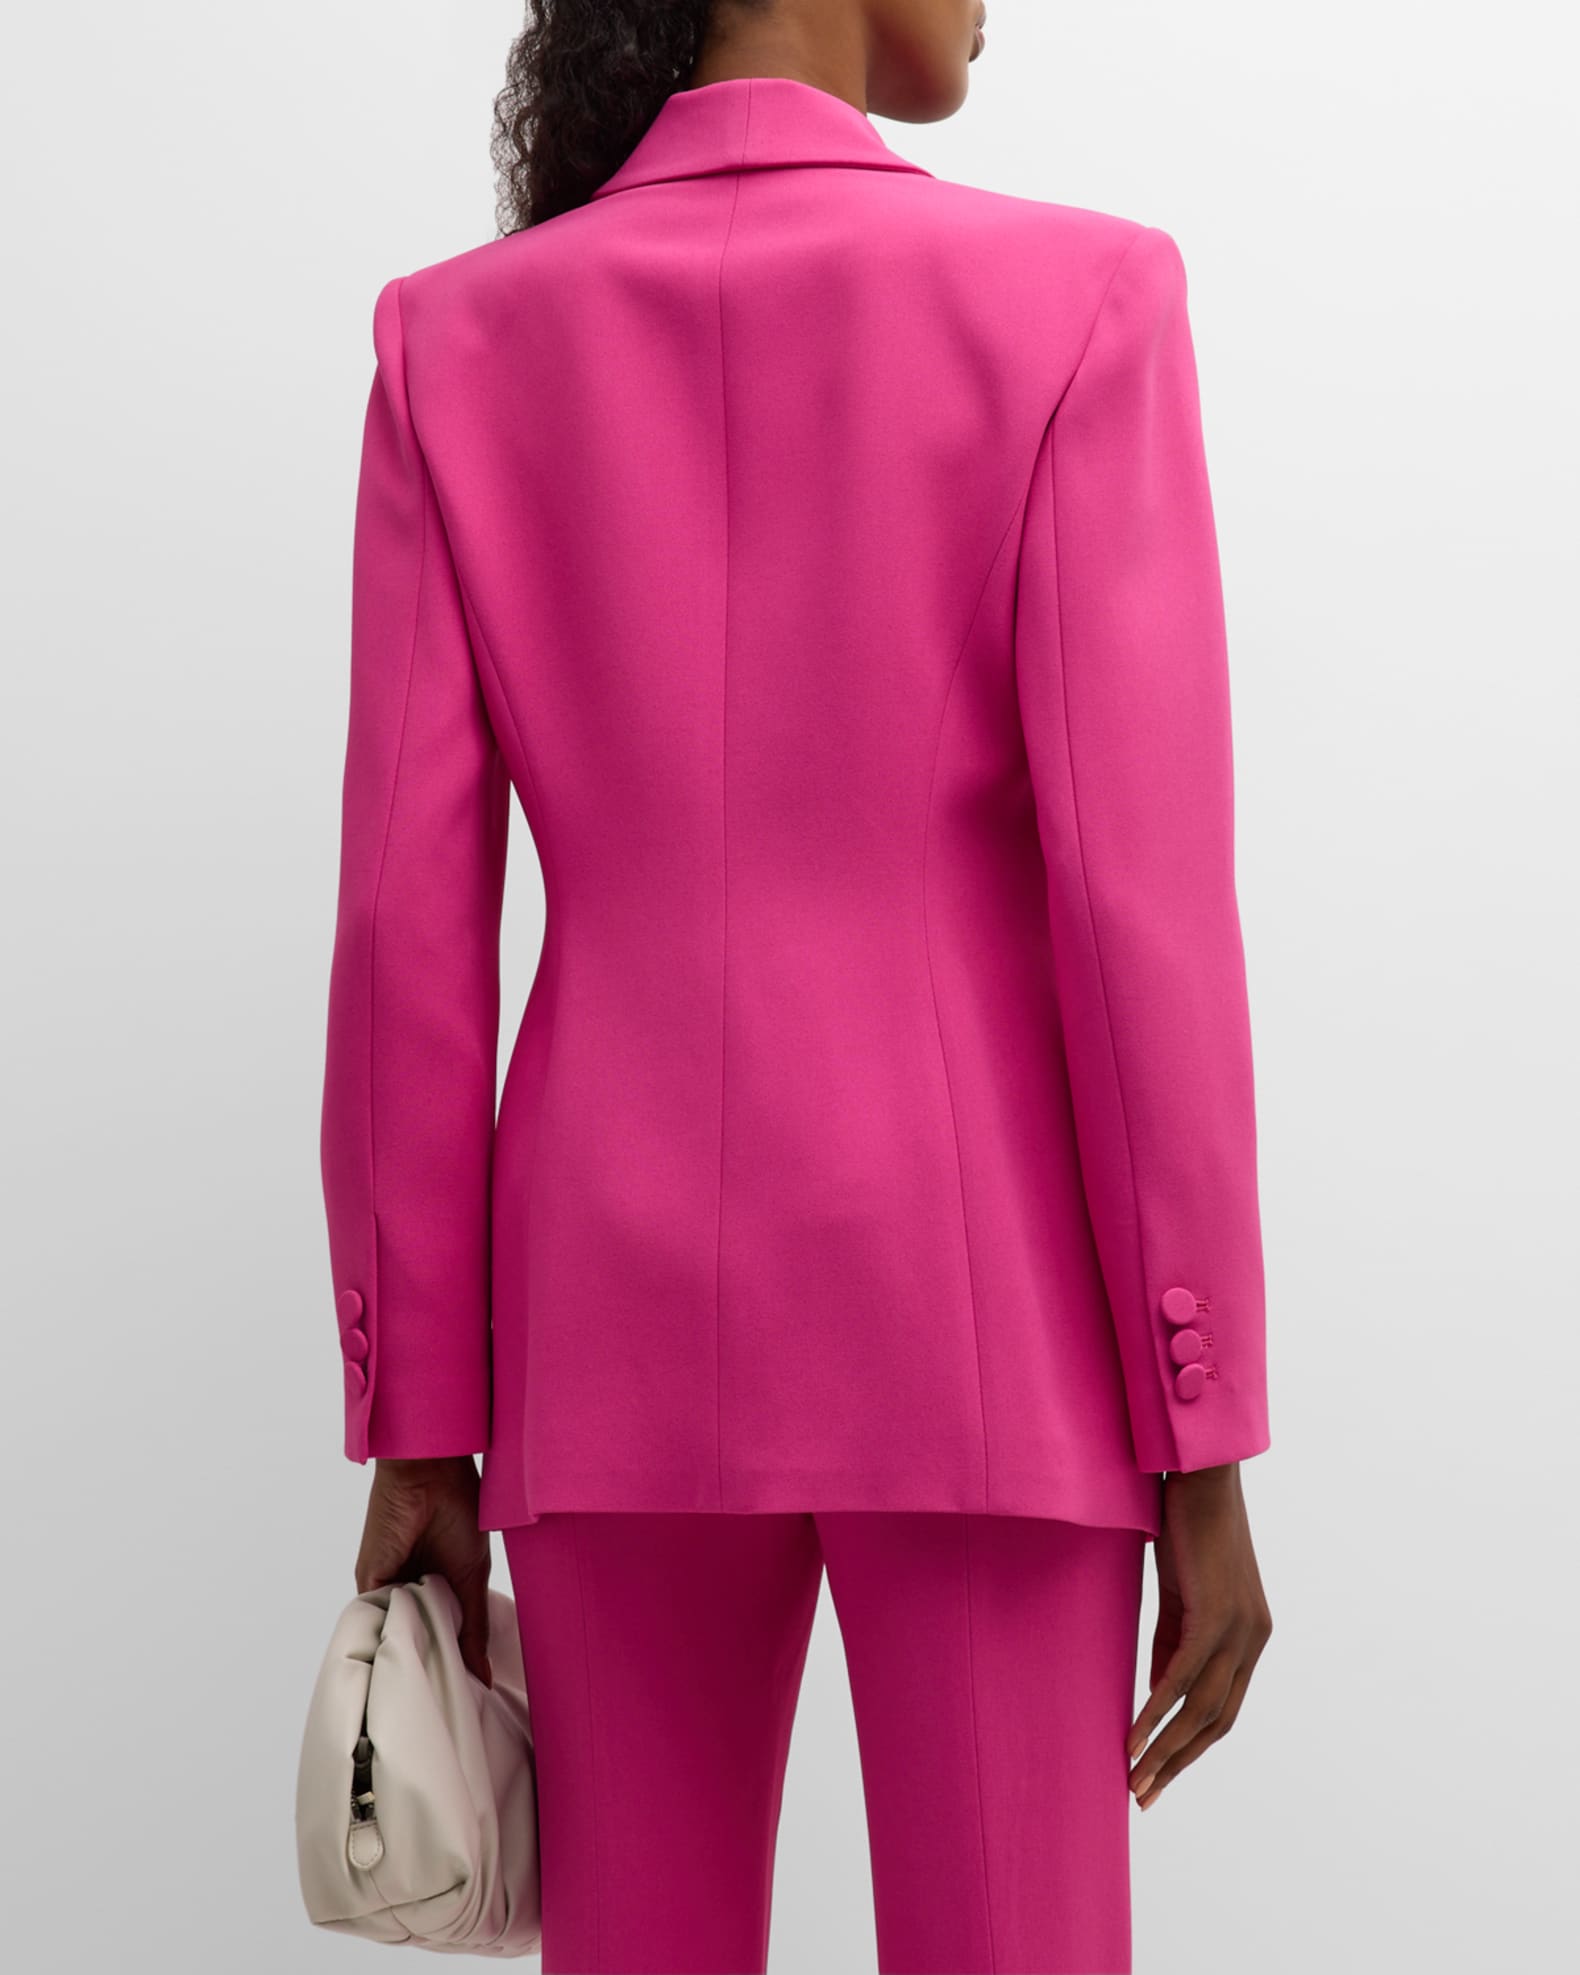 Emporio Armani Knot-Front Crepe Cady Jacket | Neiman Marcus